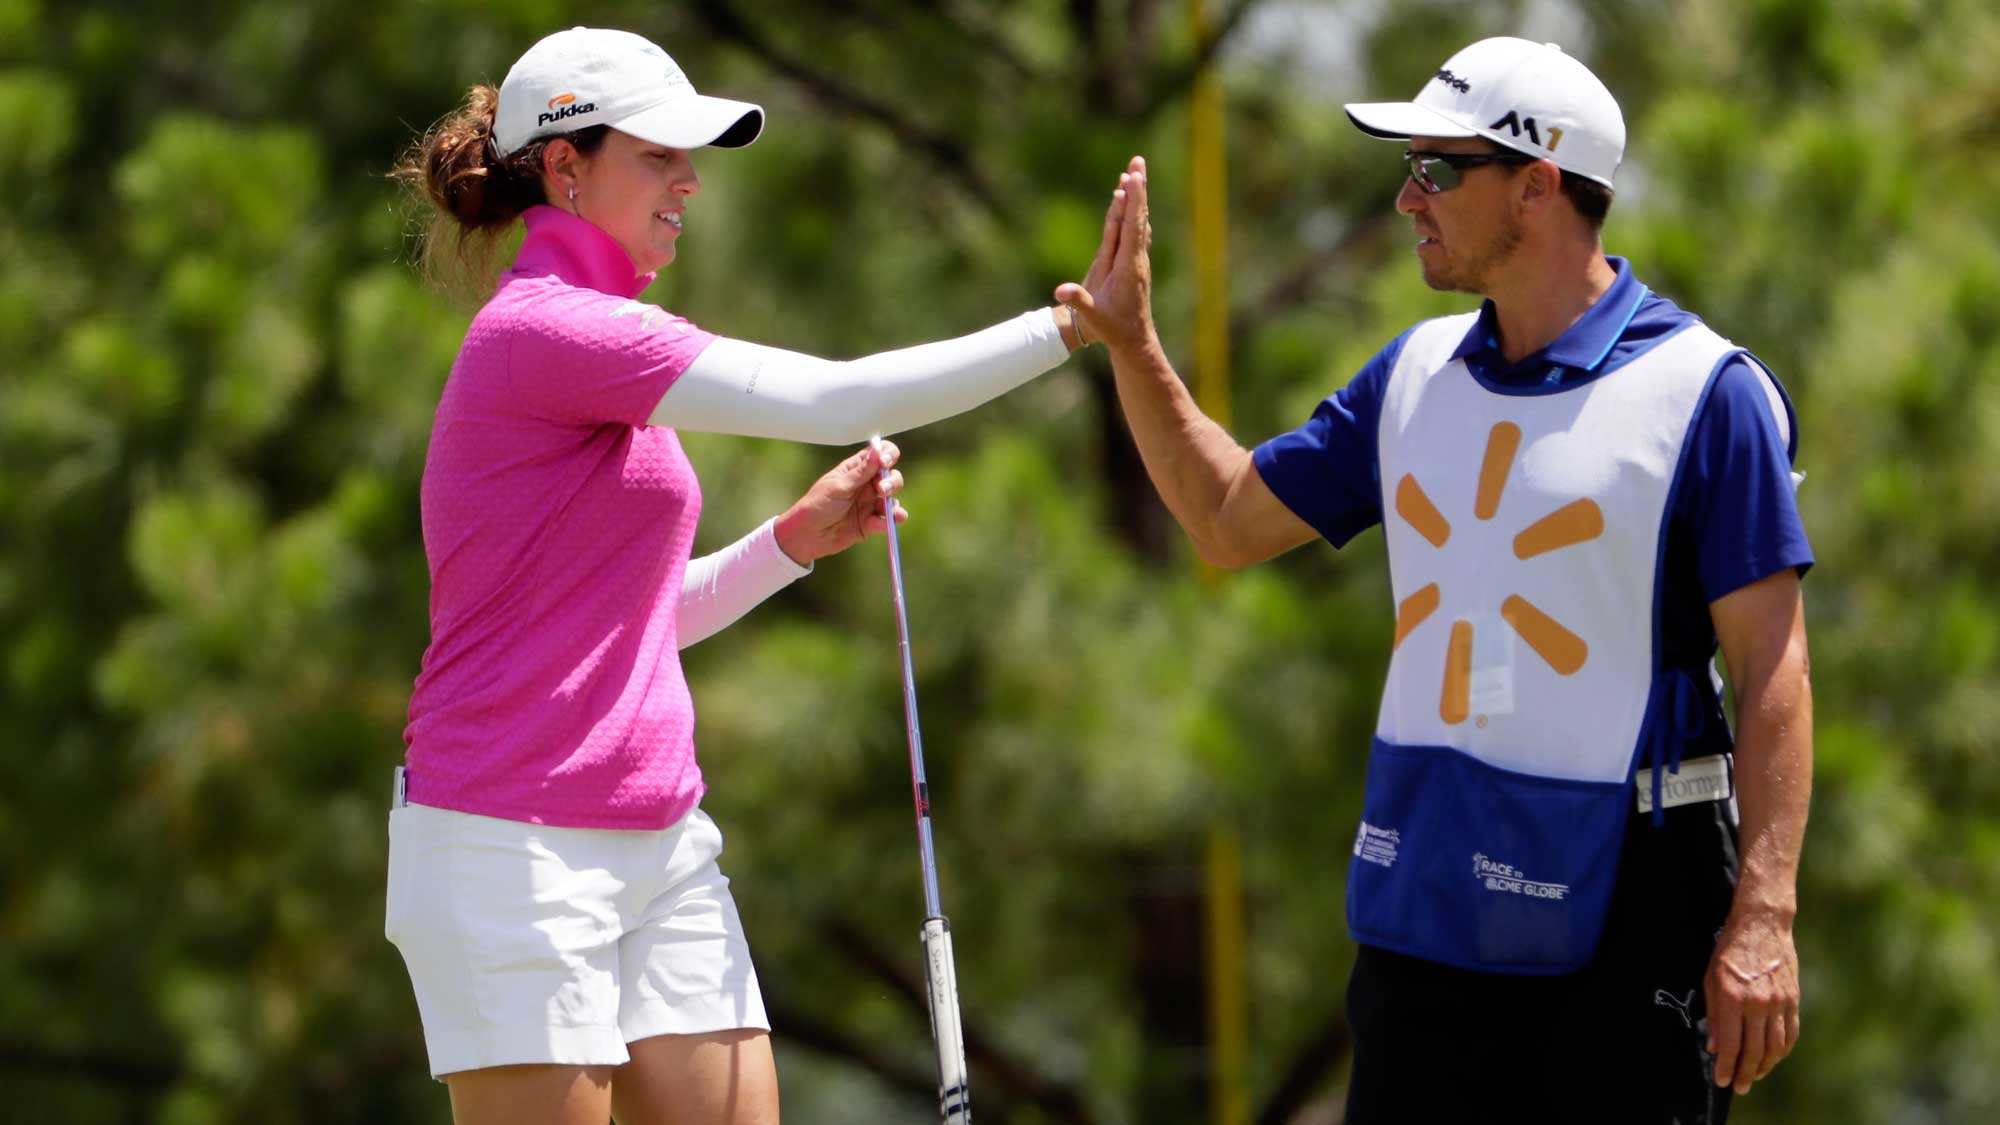 Giulia Molinaro of Italy high-fives her caddie after making a putt on the 1st hole during the final round of the Walmart NW Arkansas Championship